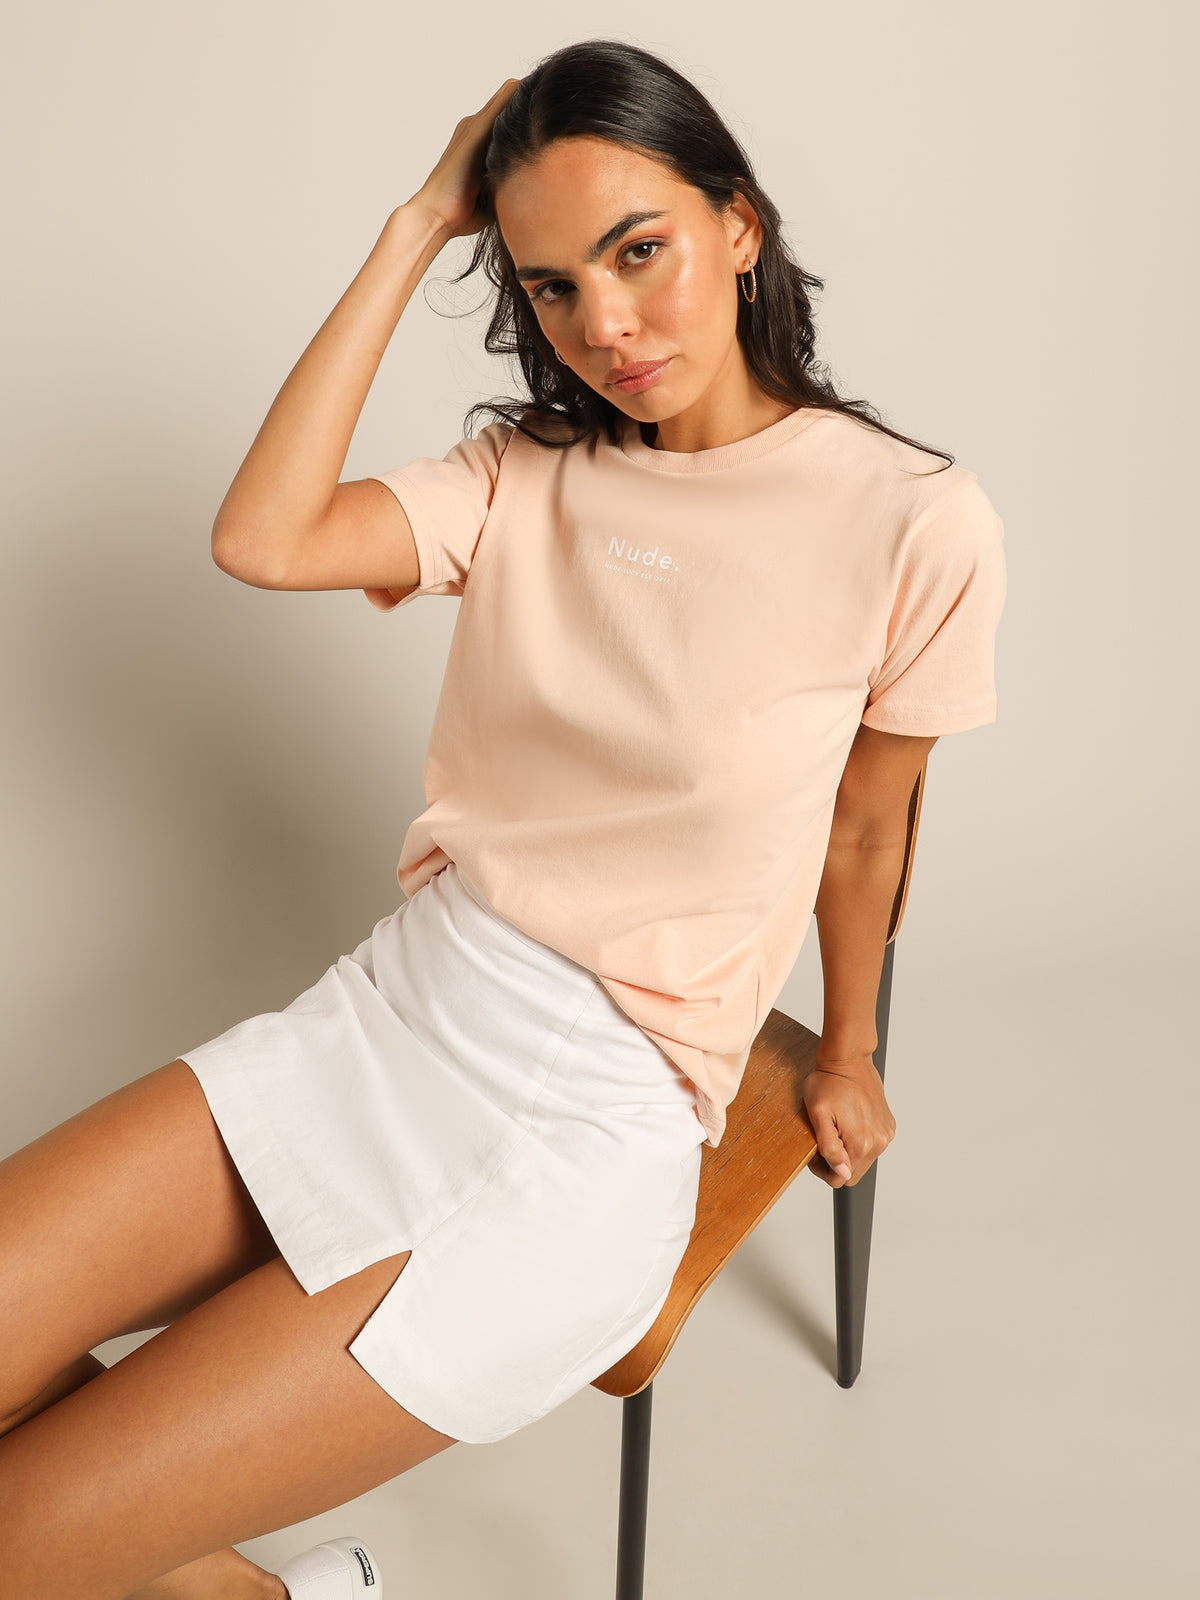 Organic Heritage T-Shirt in Mineral Pink